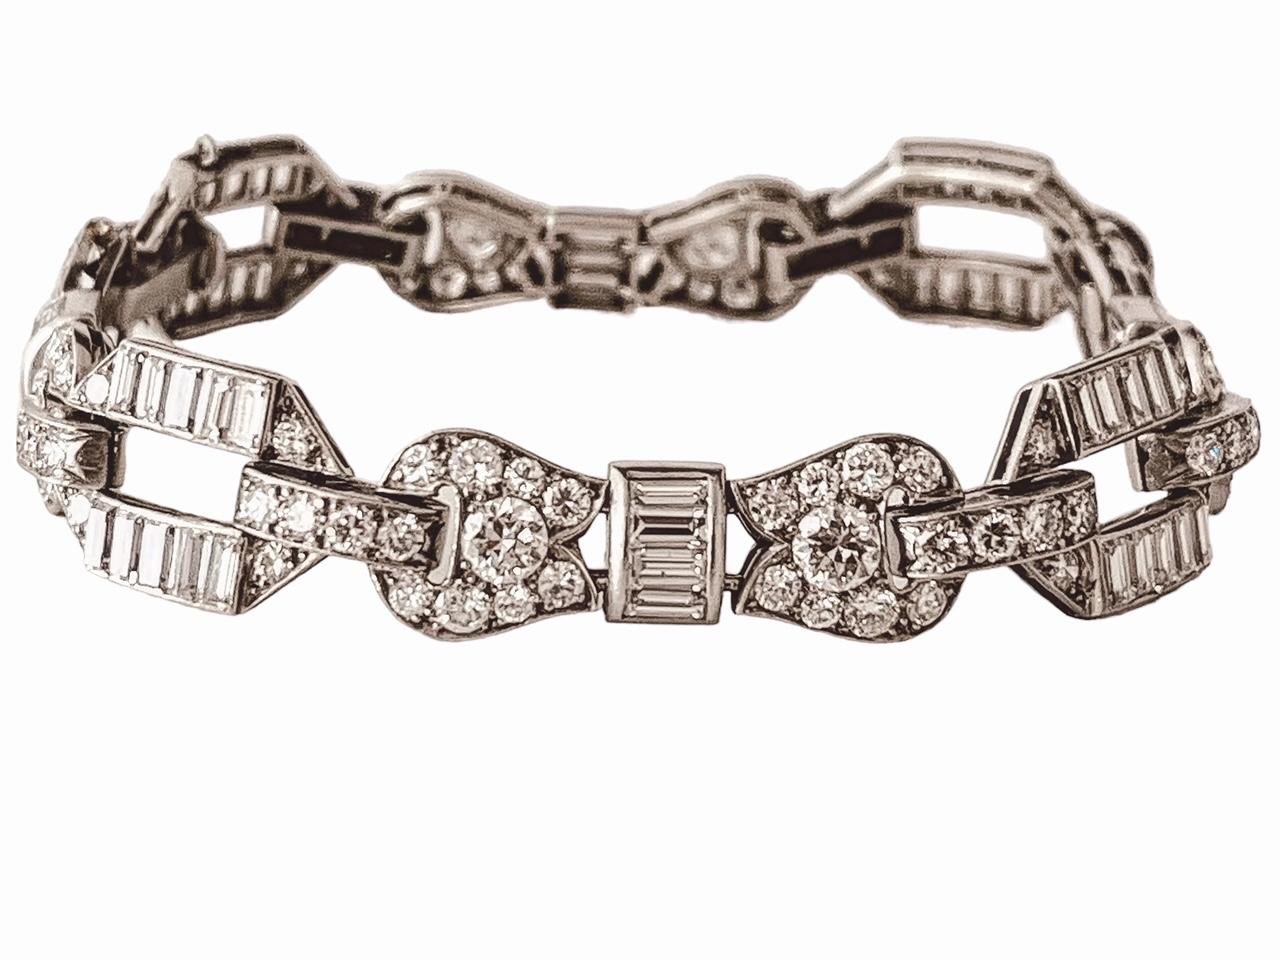 An Art Deco diamond bracelet. Set throughout with baguette and road-cut diamonds. Circa 1930s. Approximately 12cts of diamonds in total. 20.4cm in length and 1.1cm wide. 33.7 grams . Set in platinum. Price: 33,160£. Item is in very good condition